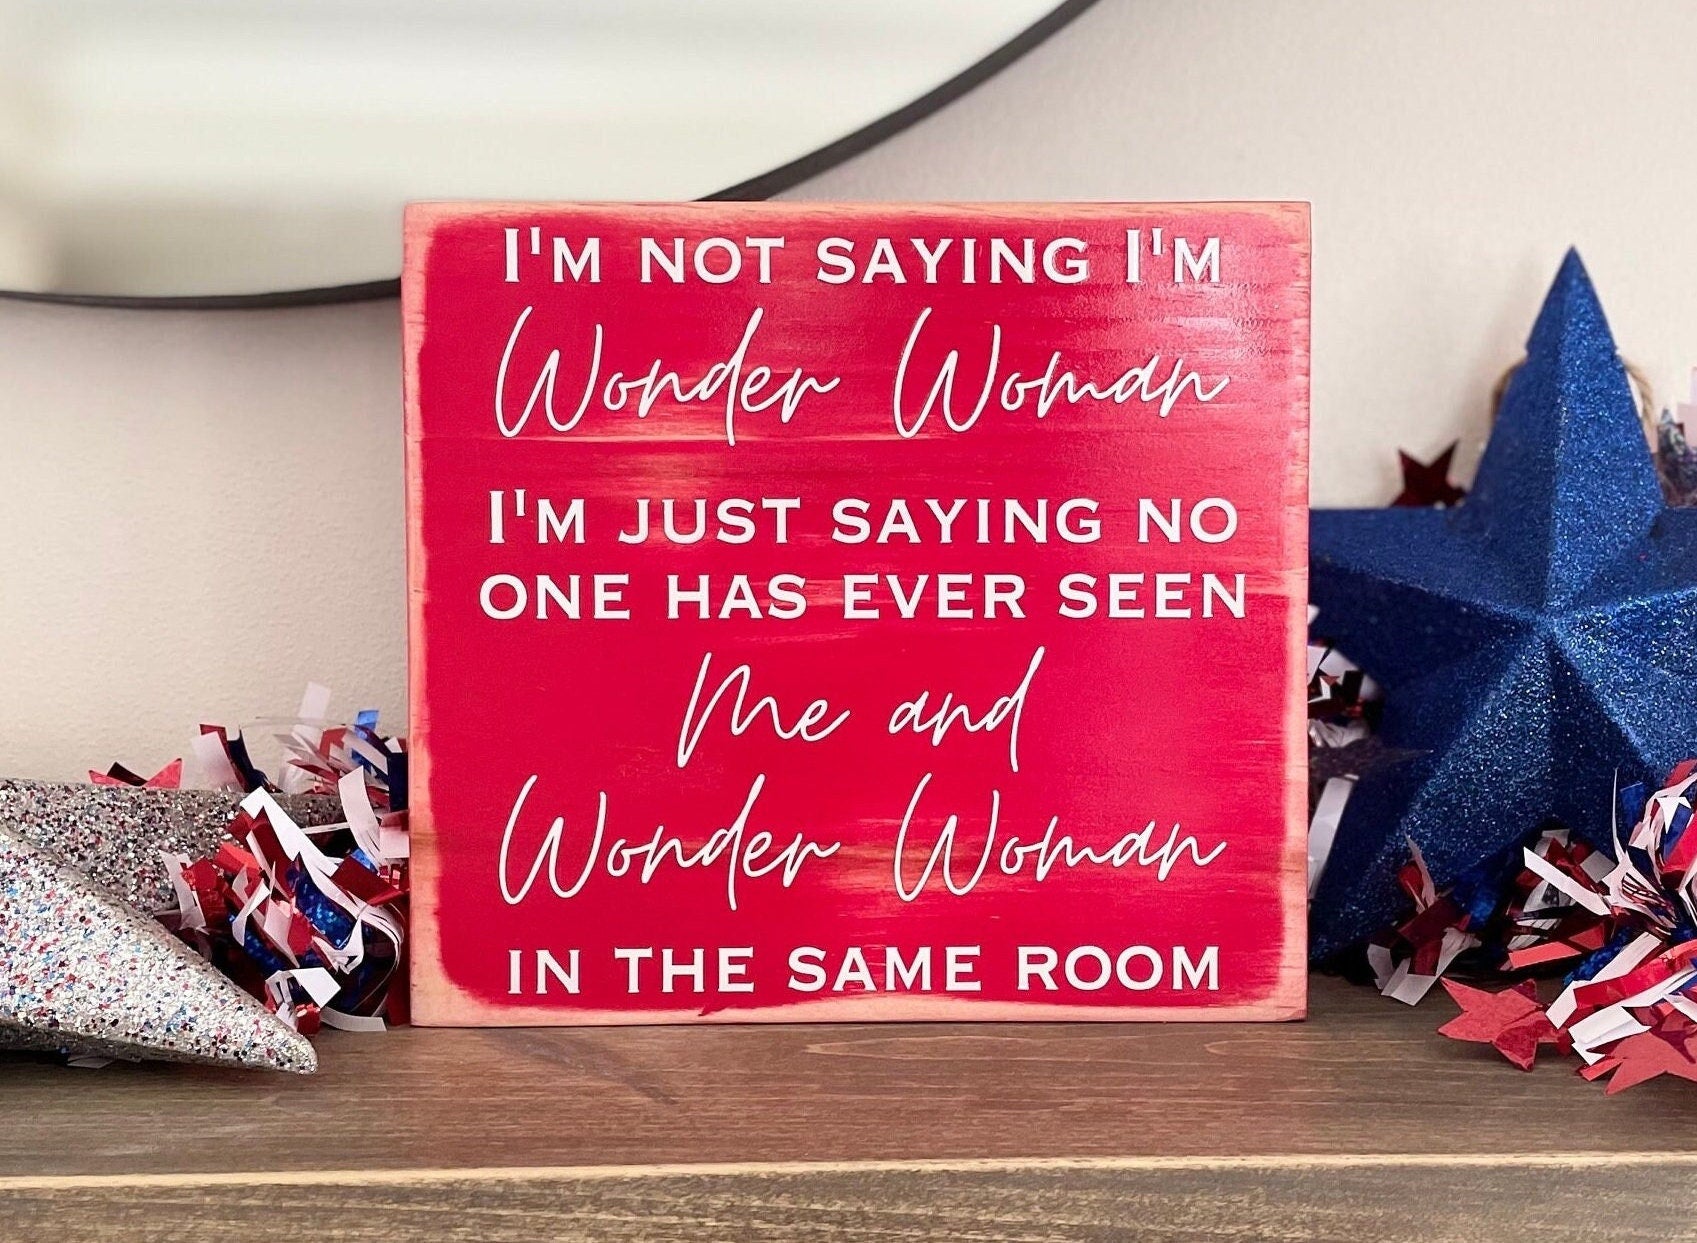 medium sized square wood sign painted red with white lettering that reads, " I'm not saying I'm Wonder Woman, I'm just saying no one has ever seen me and Wonder Woman in the same room". All text is in all caps except for "Wonder Woman" and "Me and Wonder Woman". Text is centered, takes up the entire area and is on 7 lines. Glossy finish.